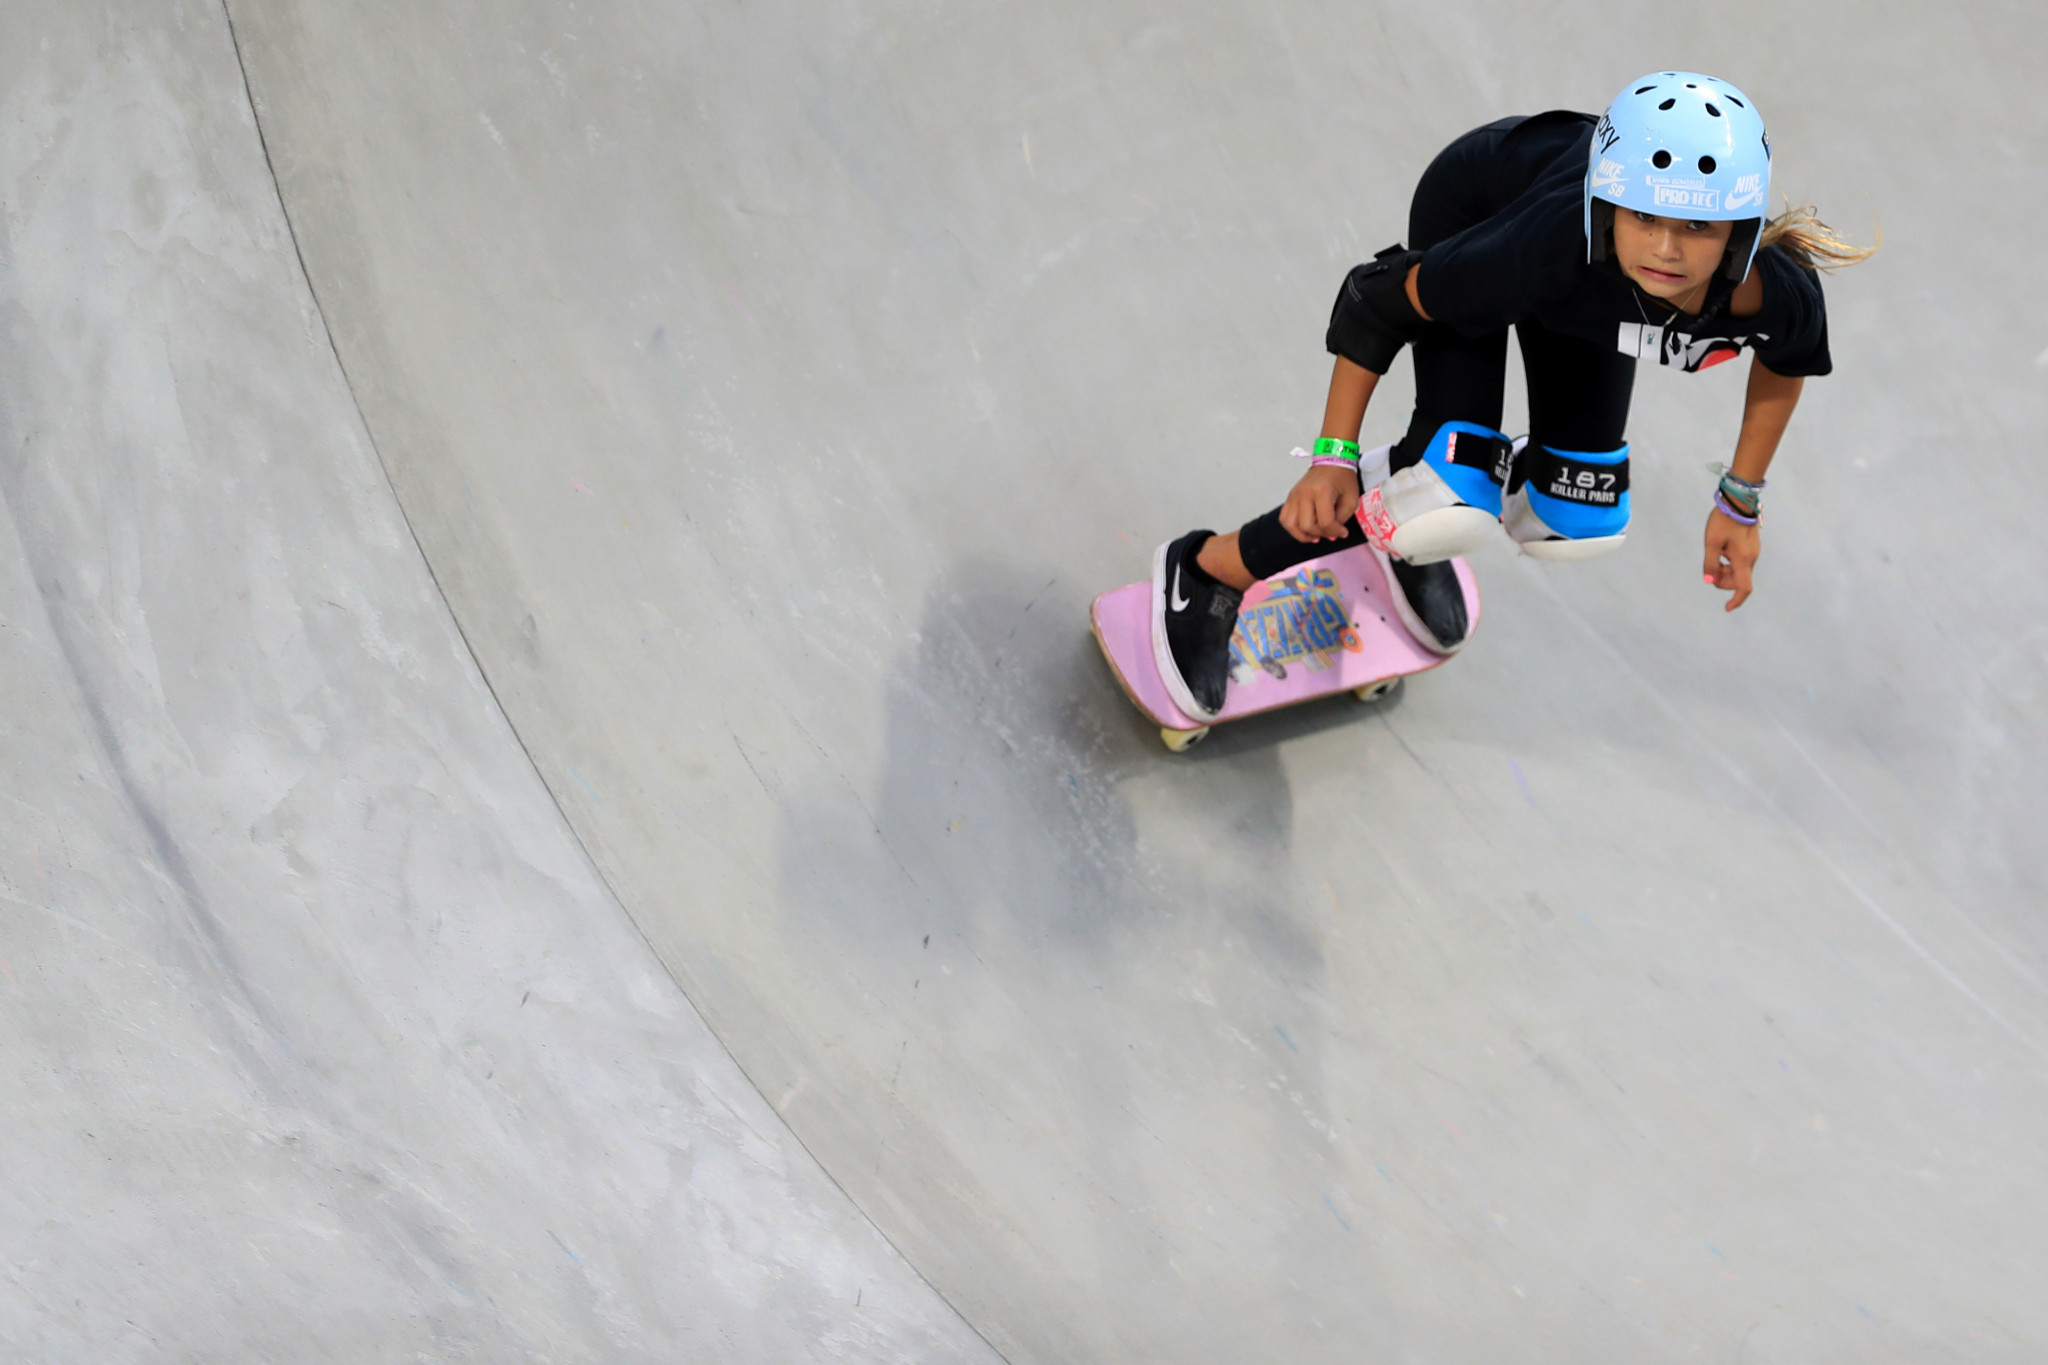 The 11-year-old has enjoyed some impressive results on the skateboarding circuit this year ©Getty Images